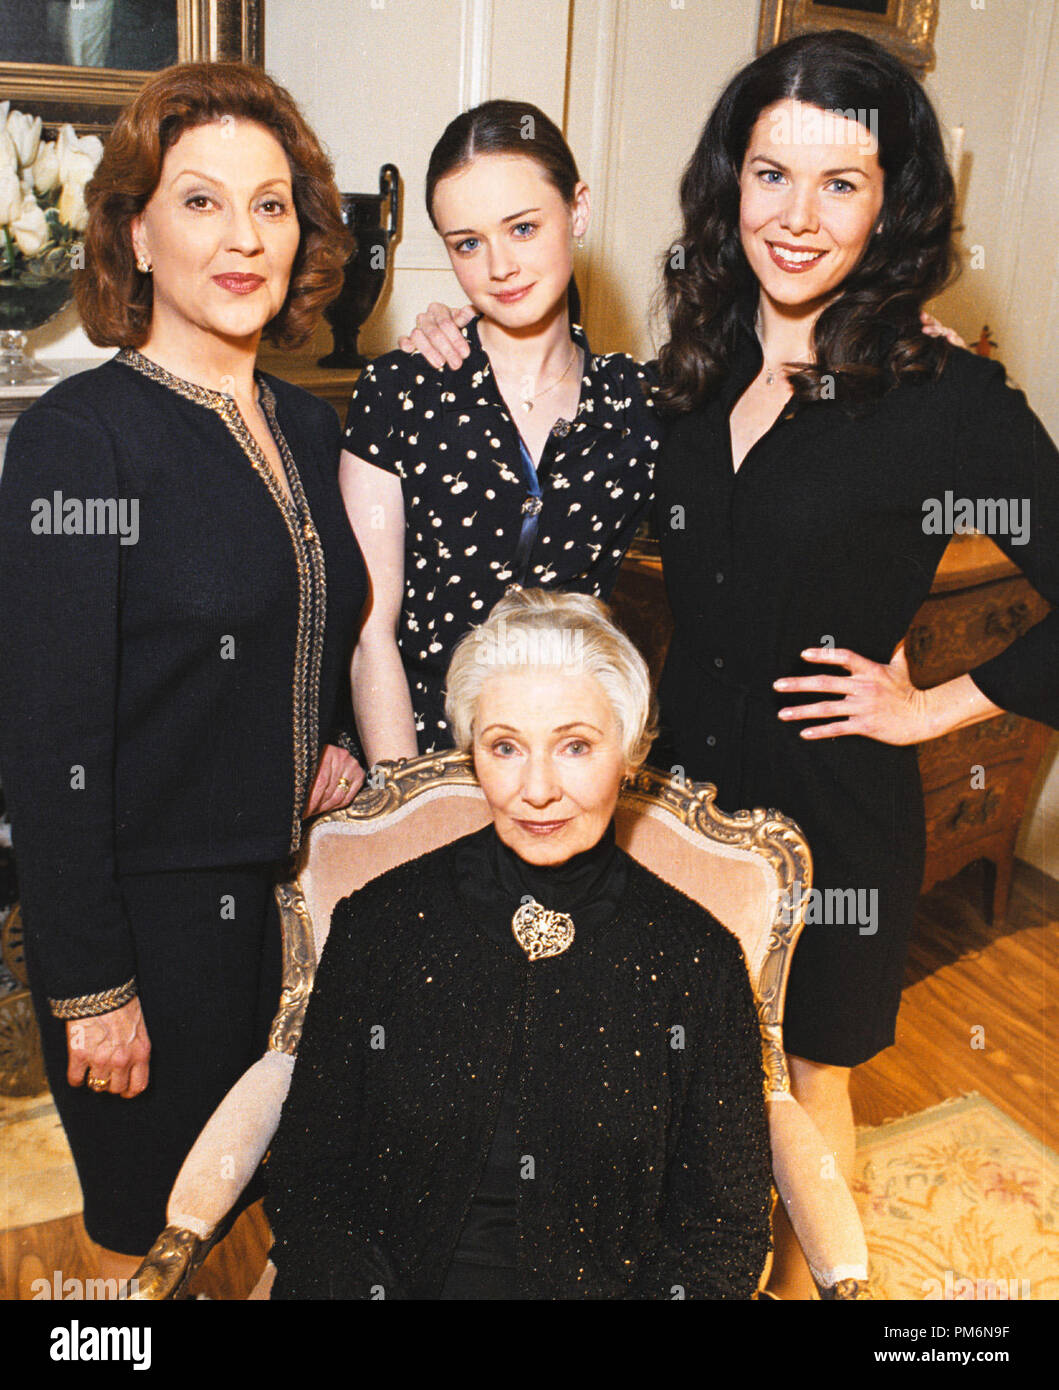 Film Still / Publicity Still from 'Gilmore Girls' (Episode: The Third Lorelai) Kelly Bishop, Alexis Bledel, Lauren Graham, Marion Ross 2001 Photo credit: Scott Humbert  File Reference # 30847949THA  For Editorial Use Only -  All Rights Reserved Stock Photo